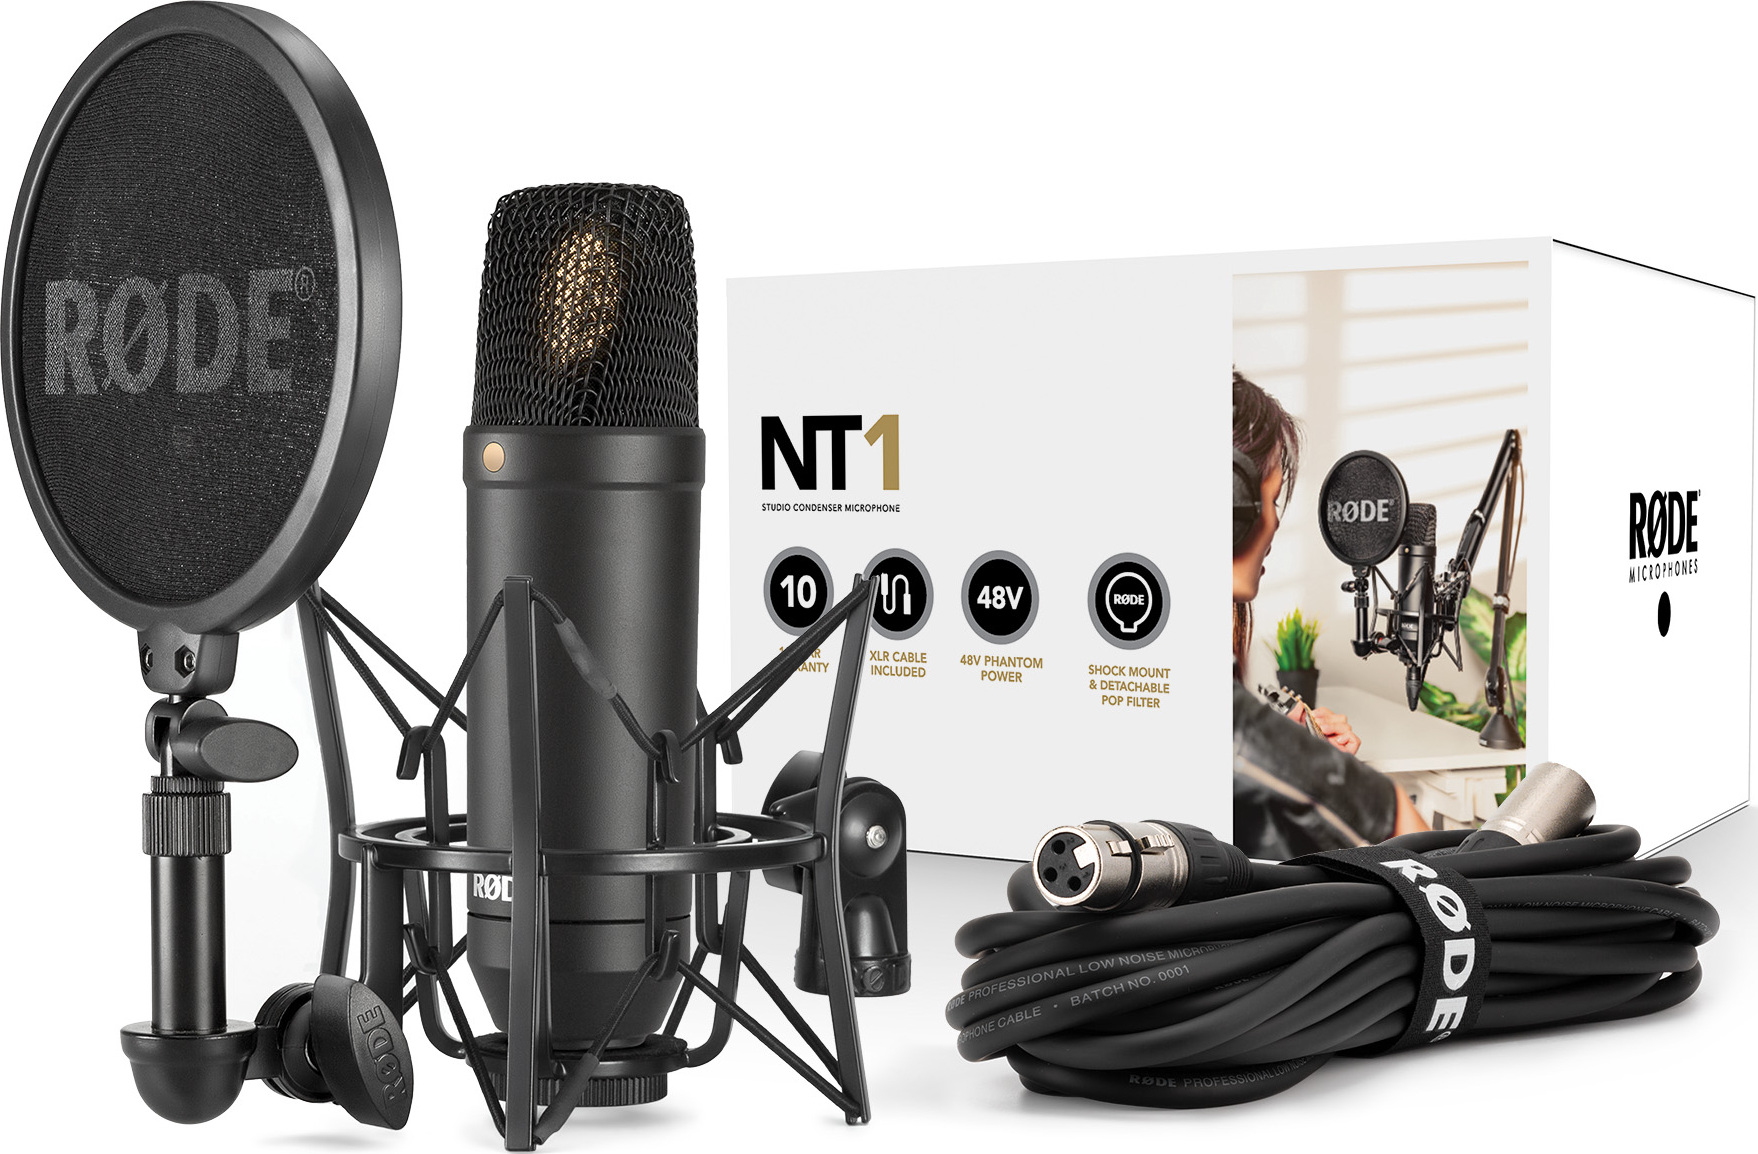 Rode Nt1 Kit - Microphone pack with stand - Main picture